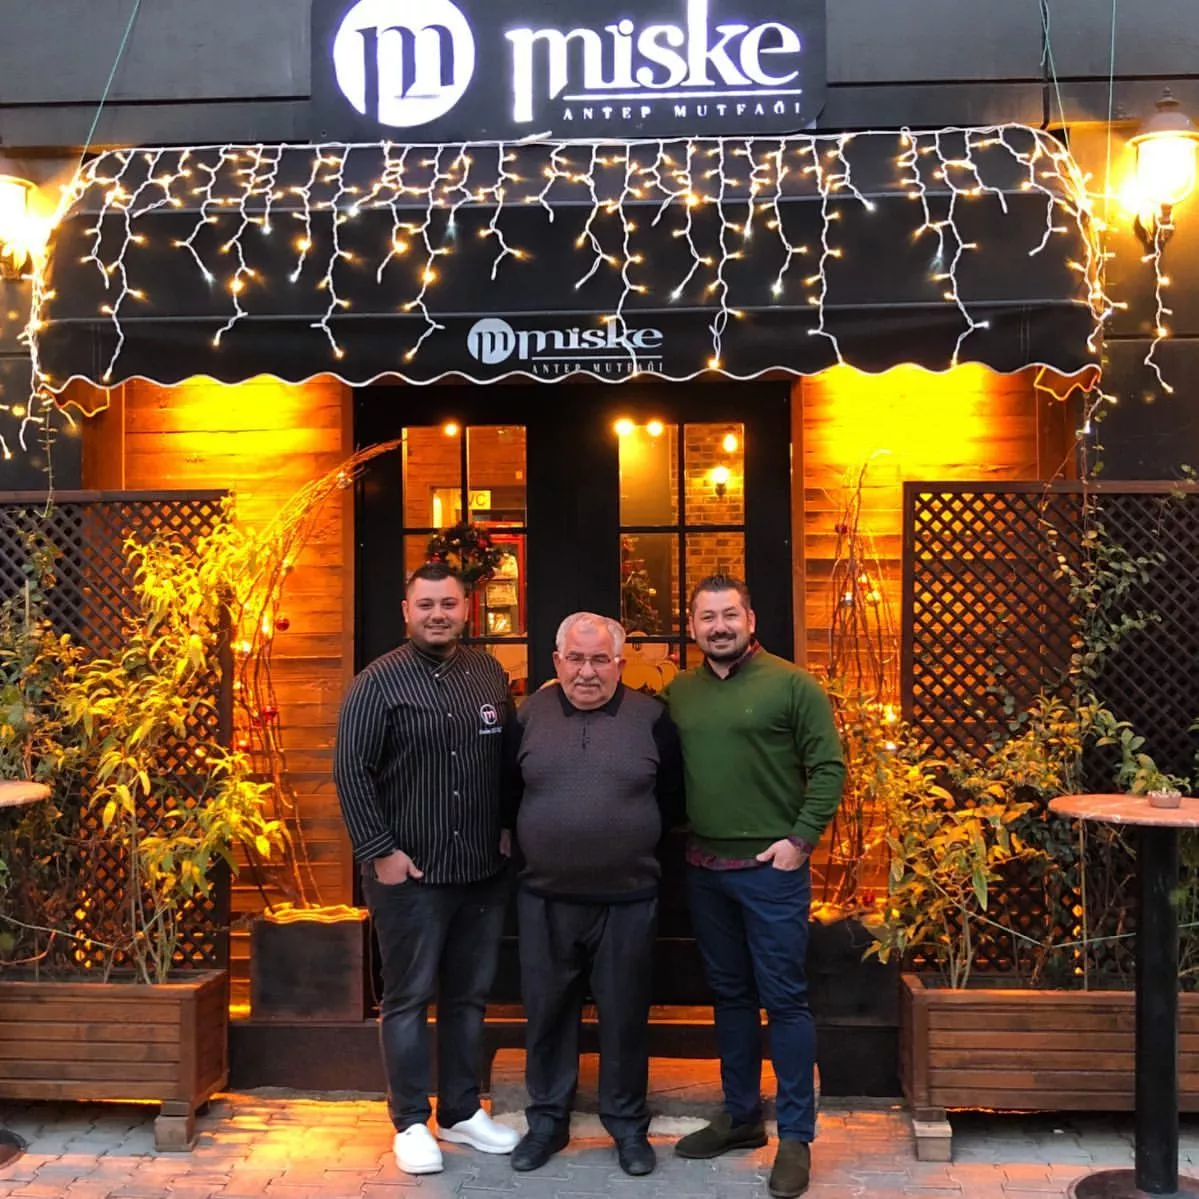 Miske in Turkey, Central Asia | Restaurants - Rated 3.6